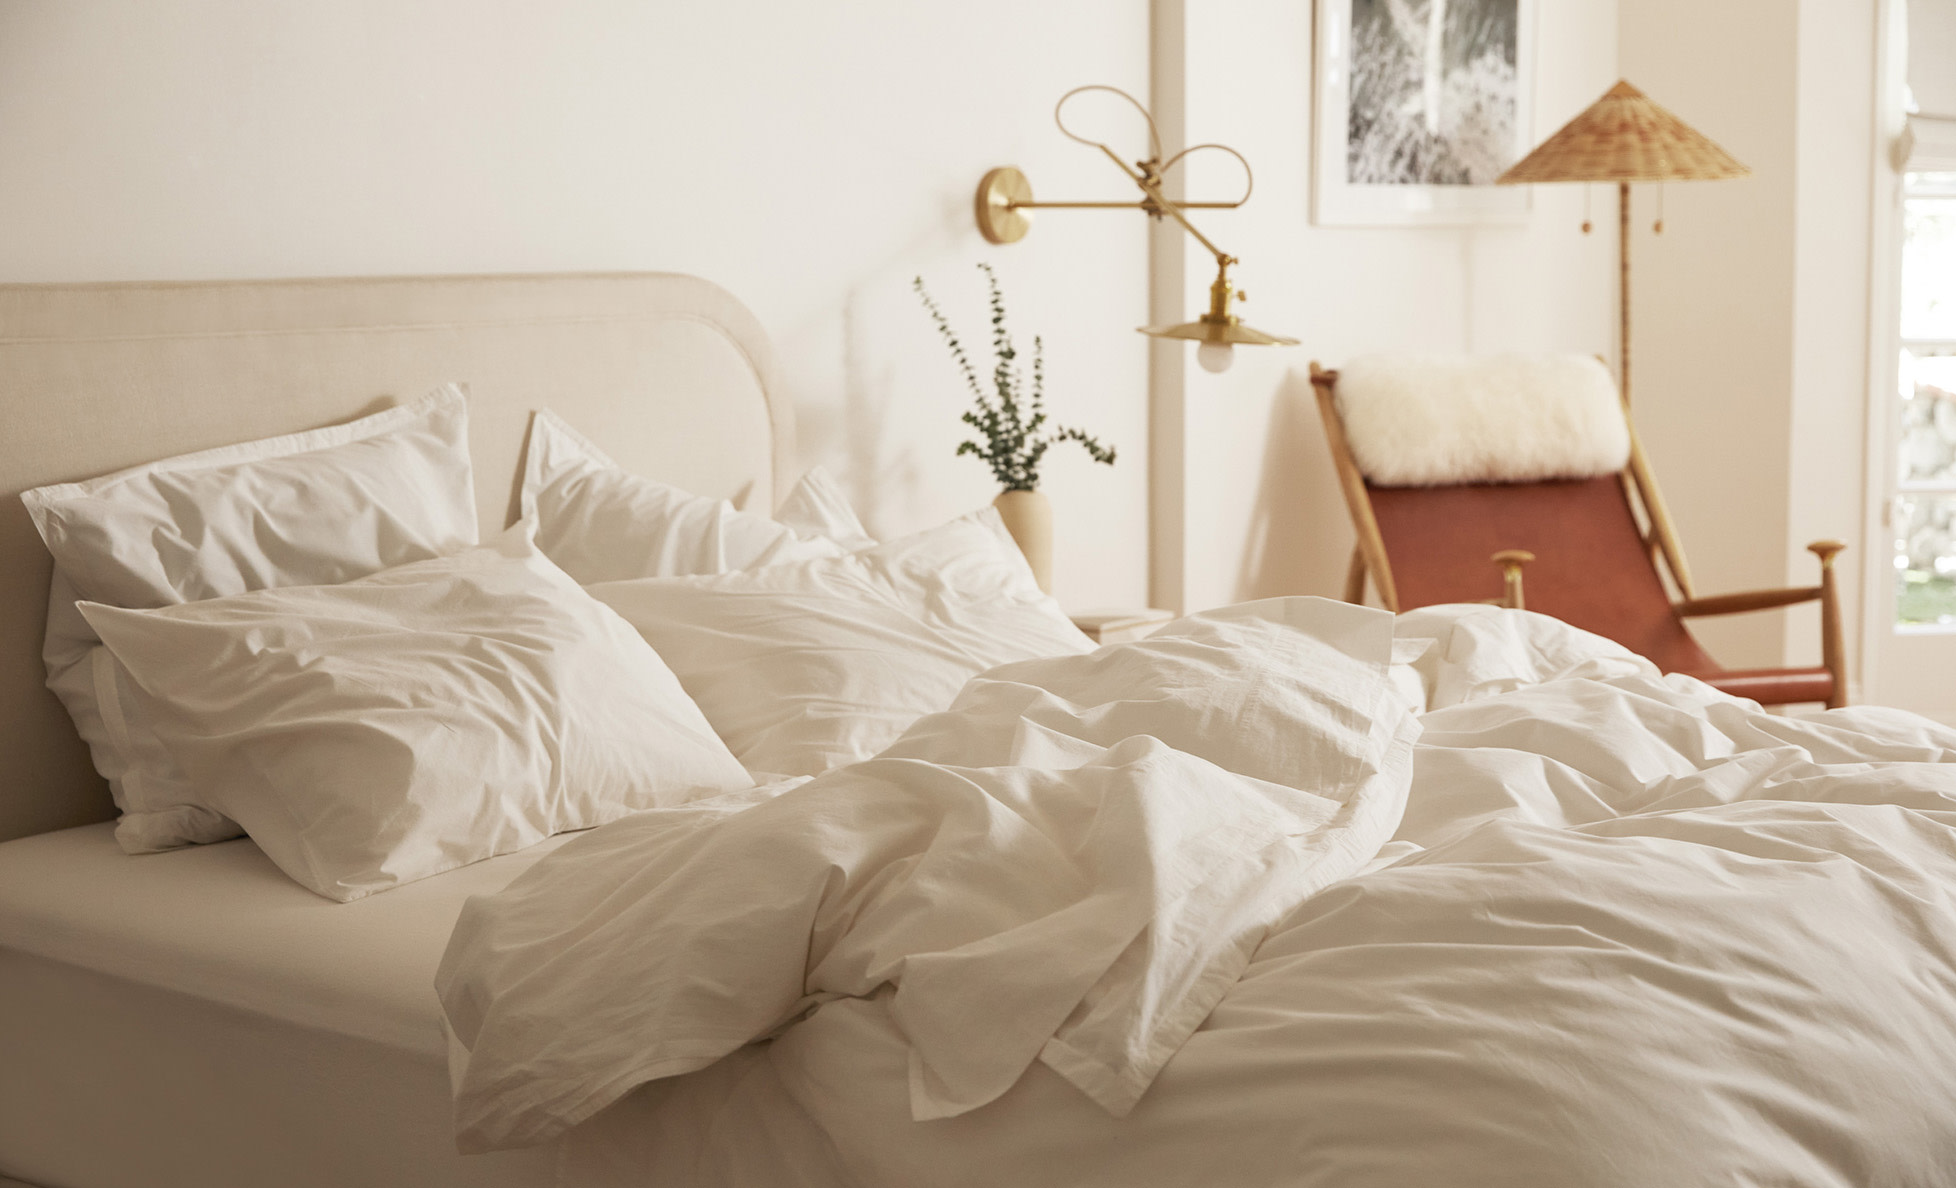 White percale sheets on a messy bed